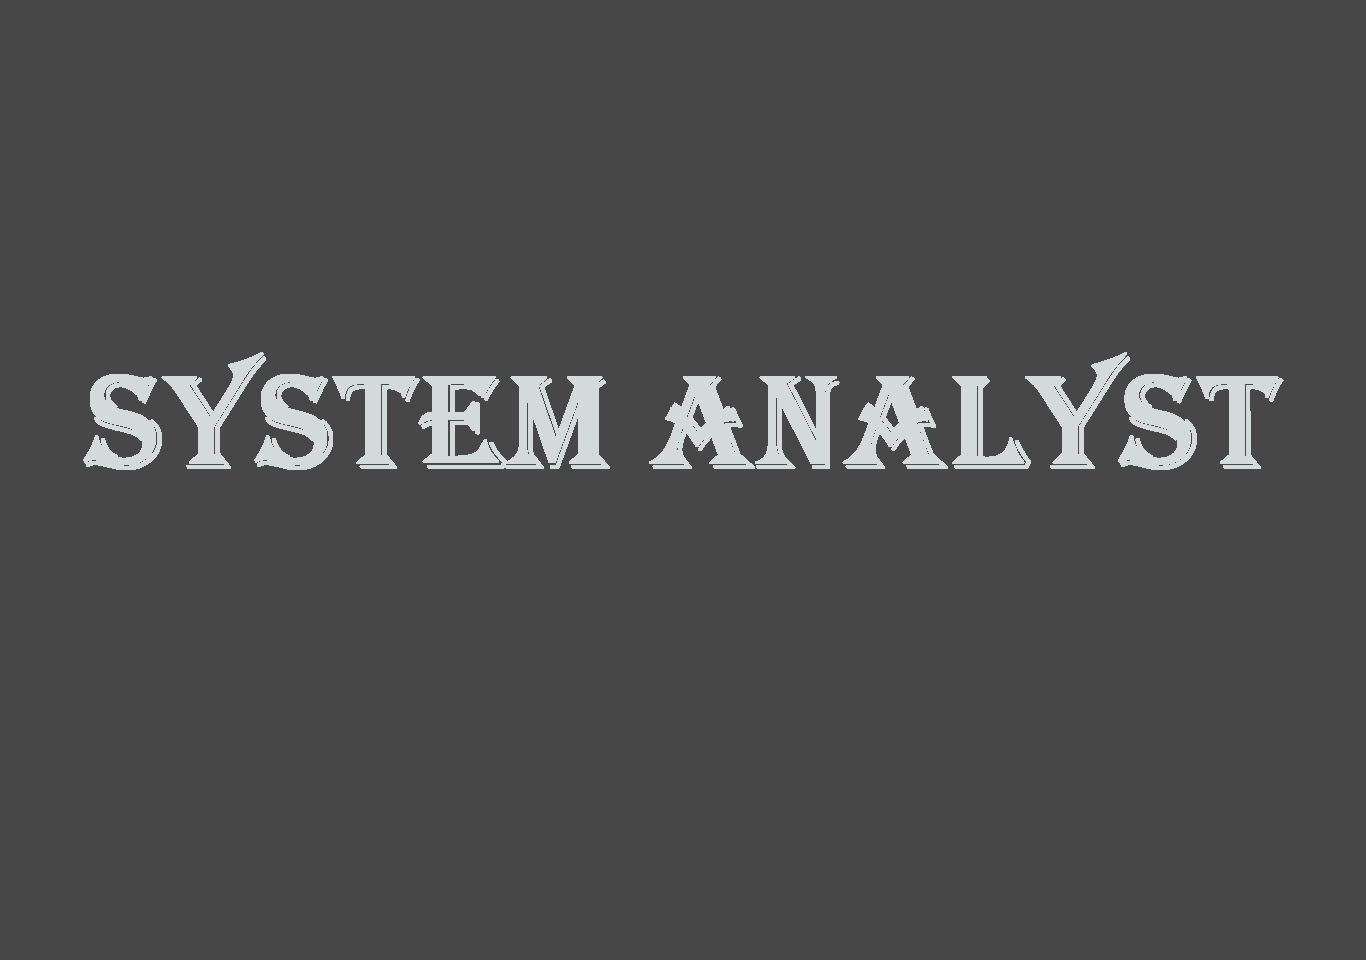 What is system analyst?